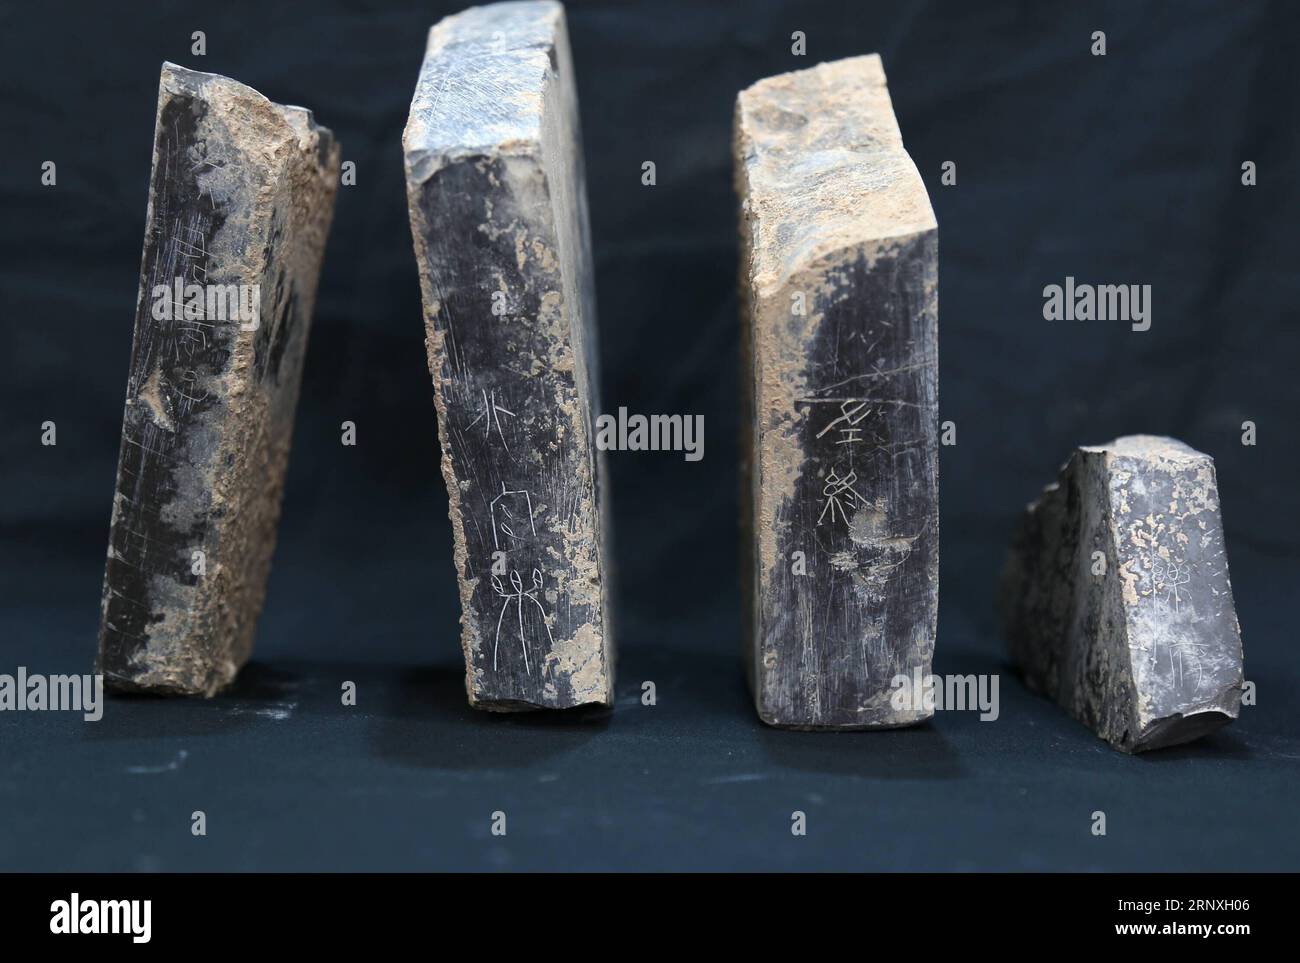 (180129) -- XI AN, Jan. 29, 2018 () -- File photo shows chime debris with inscriptions at the ruins of a government office building, which was believed to be a musical department of the Qin Dynasty (221-207 B.C.), in northwest China s Shaanxi Province. The ruins, 110 meters long and 19.5 meters wide, were composed of four rooms of equal area, with clay walls of around 3 meters thick, said Zhang Yanglizheng, assistant researcher with the provincial research institute of archaeology. In addition to architecture materials, such as tiles and bricks, pieces of stone chimes, a percussion instrument Stock Photo